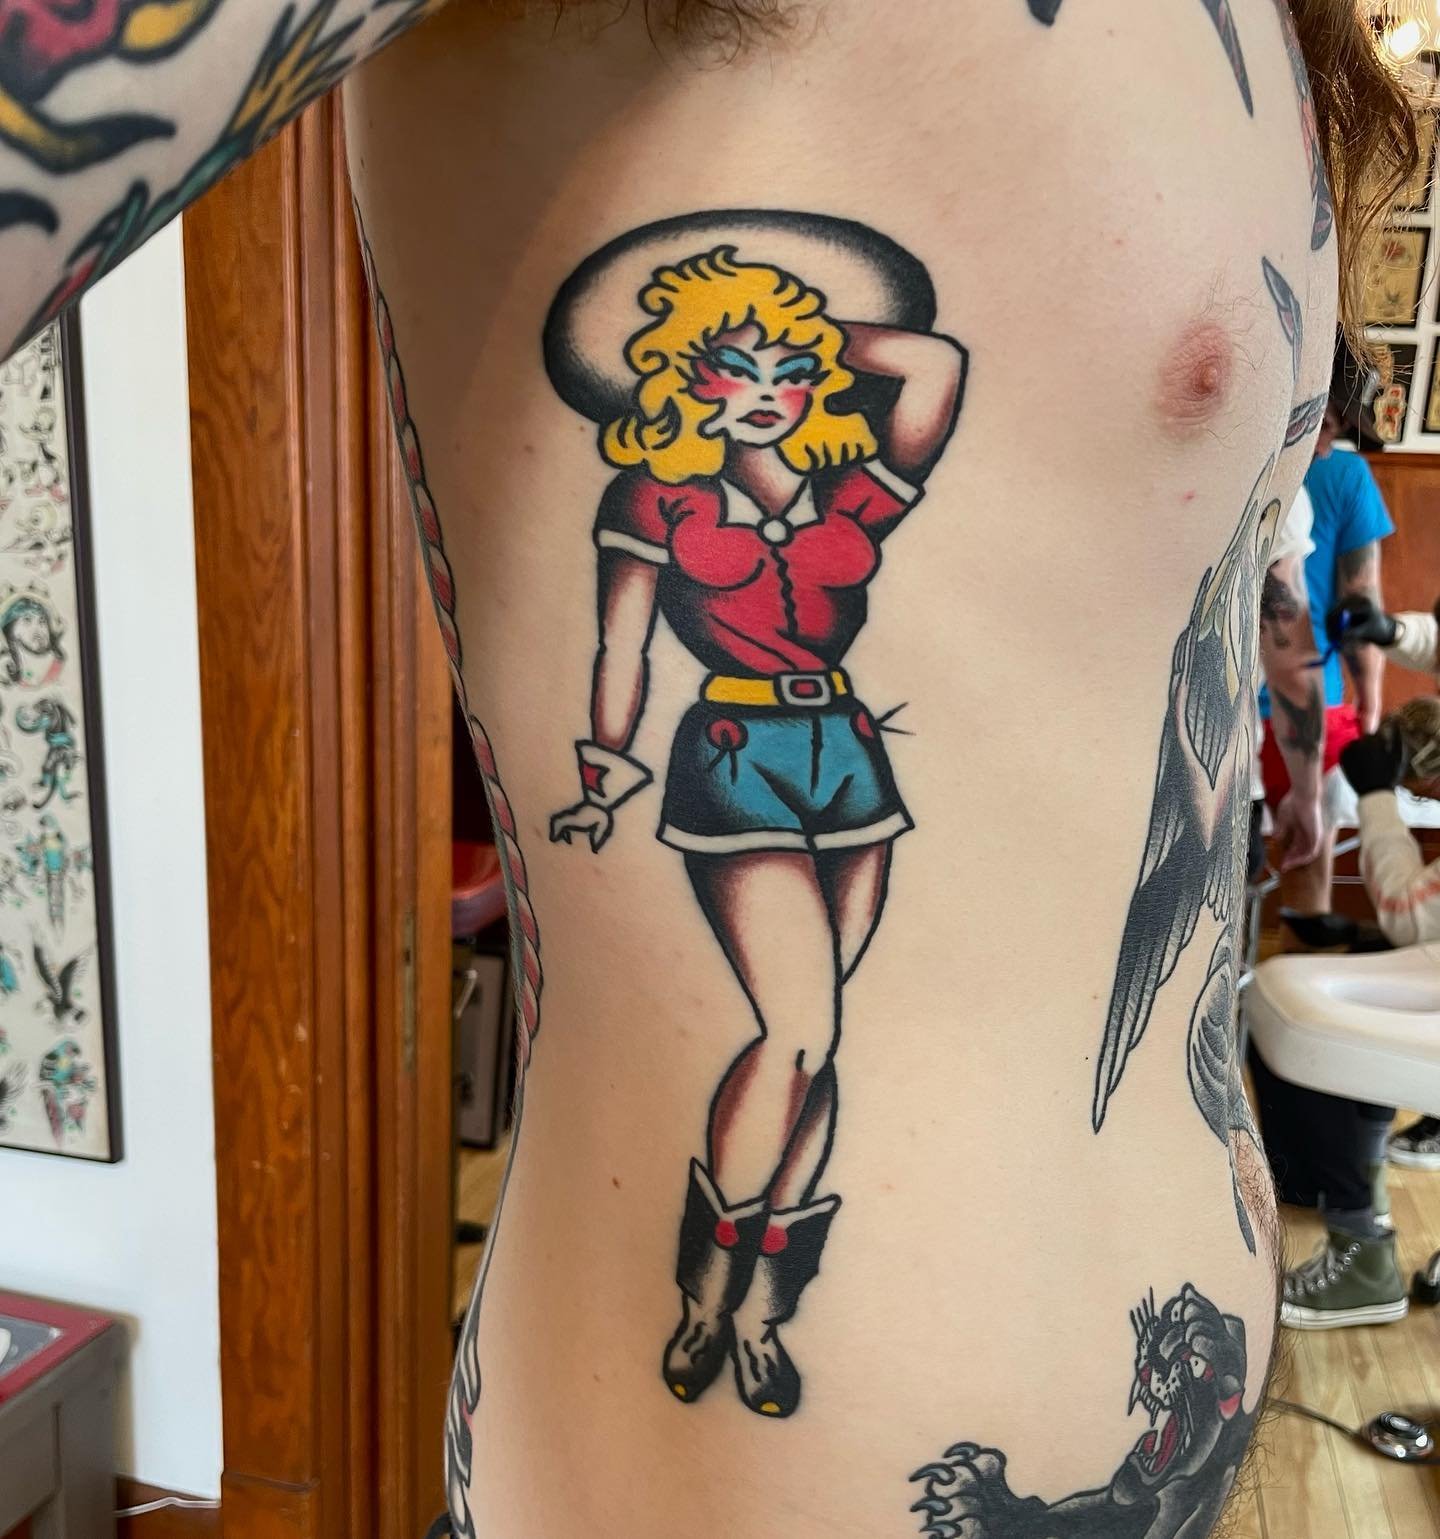 Healed cowgirl by @spencerevanstattoos . He&rsquo;s still locked out of his Instagram account! Spncrvns@gmail.com to book appointments